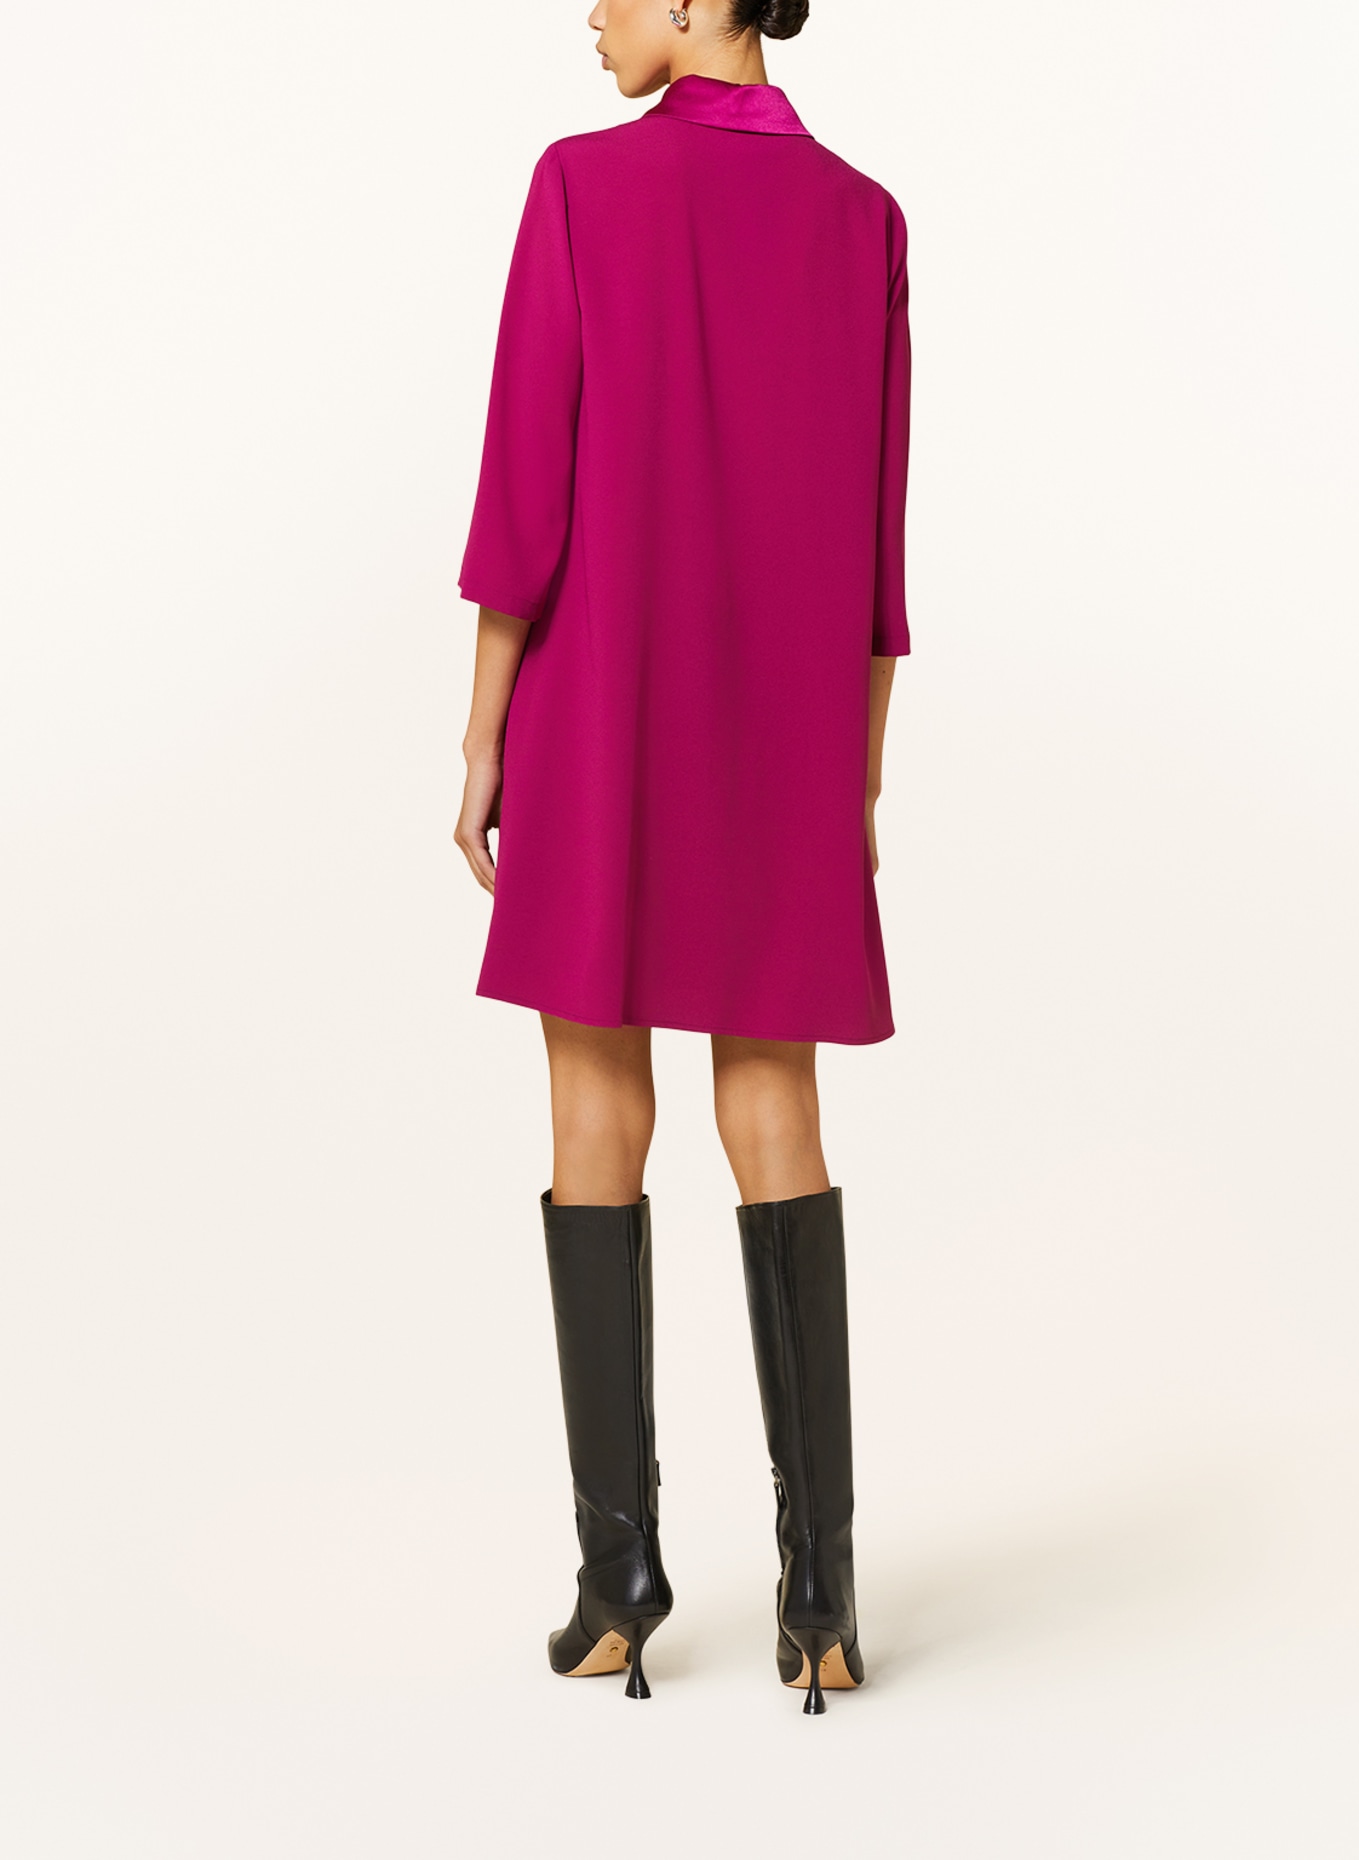 RIANI Dress with 3/4 sleeves, Color: FUCHSIA (Image 3)